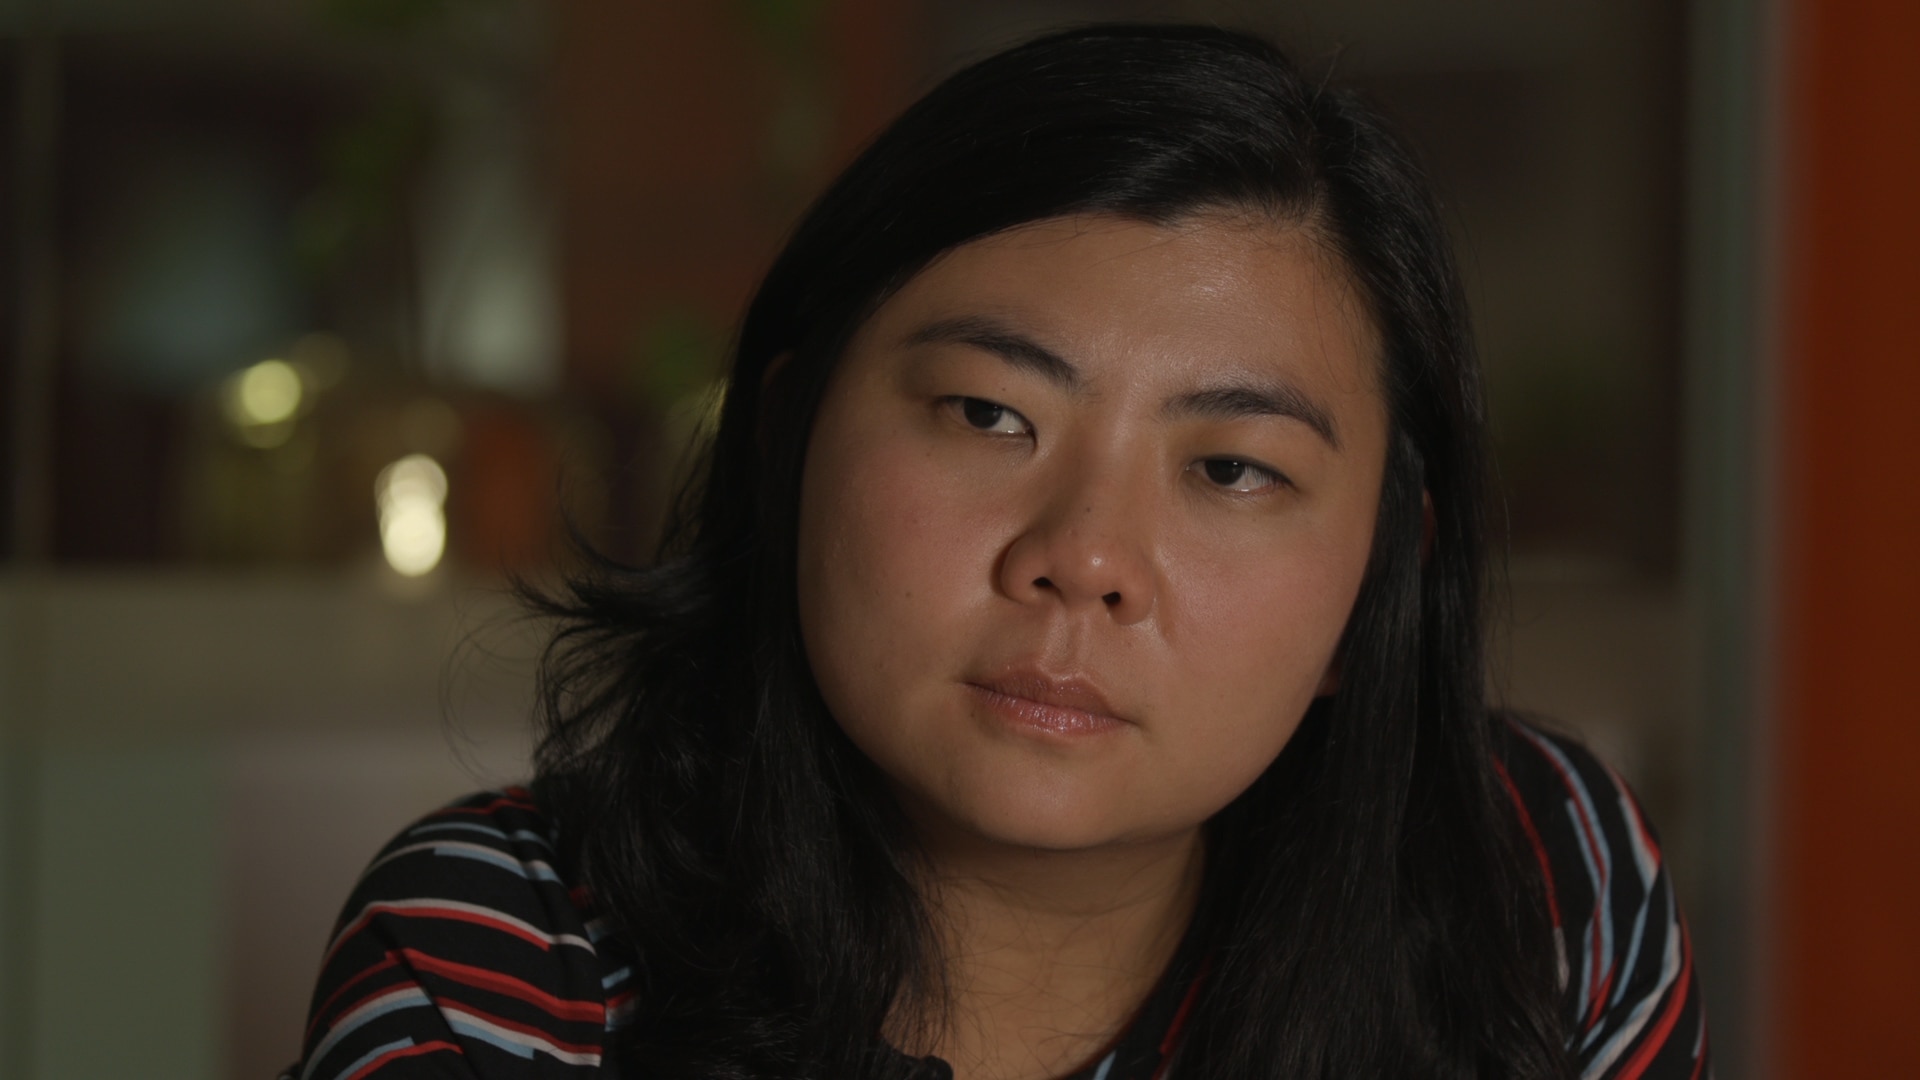  Indonesian human rights lawyer Veronica Koman says she will continue to speak out despite daily death threats.